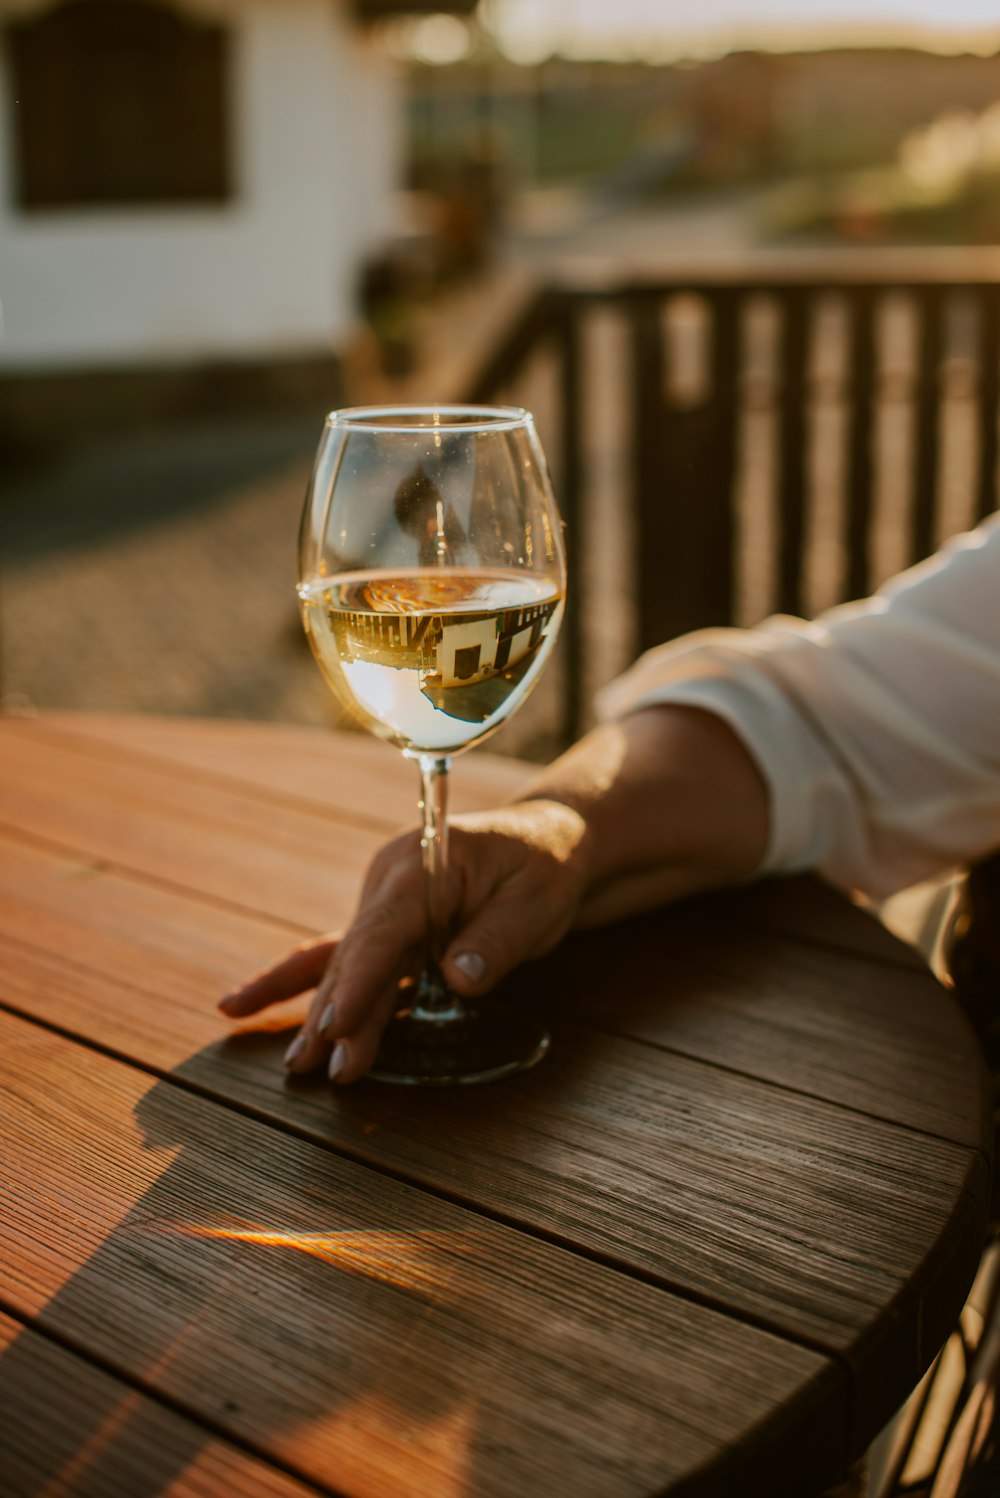 a person holding a glass of wine